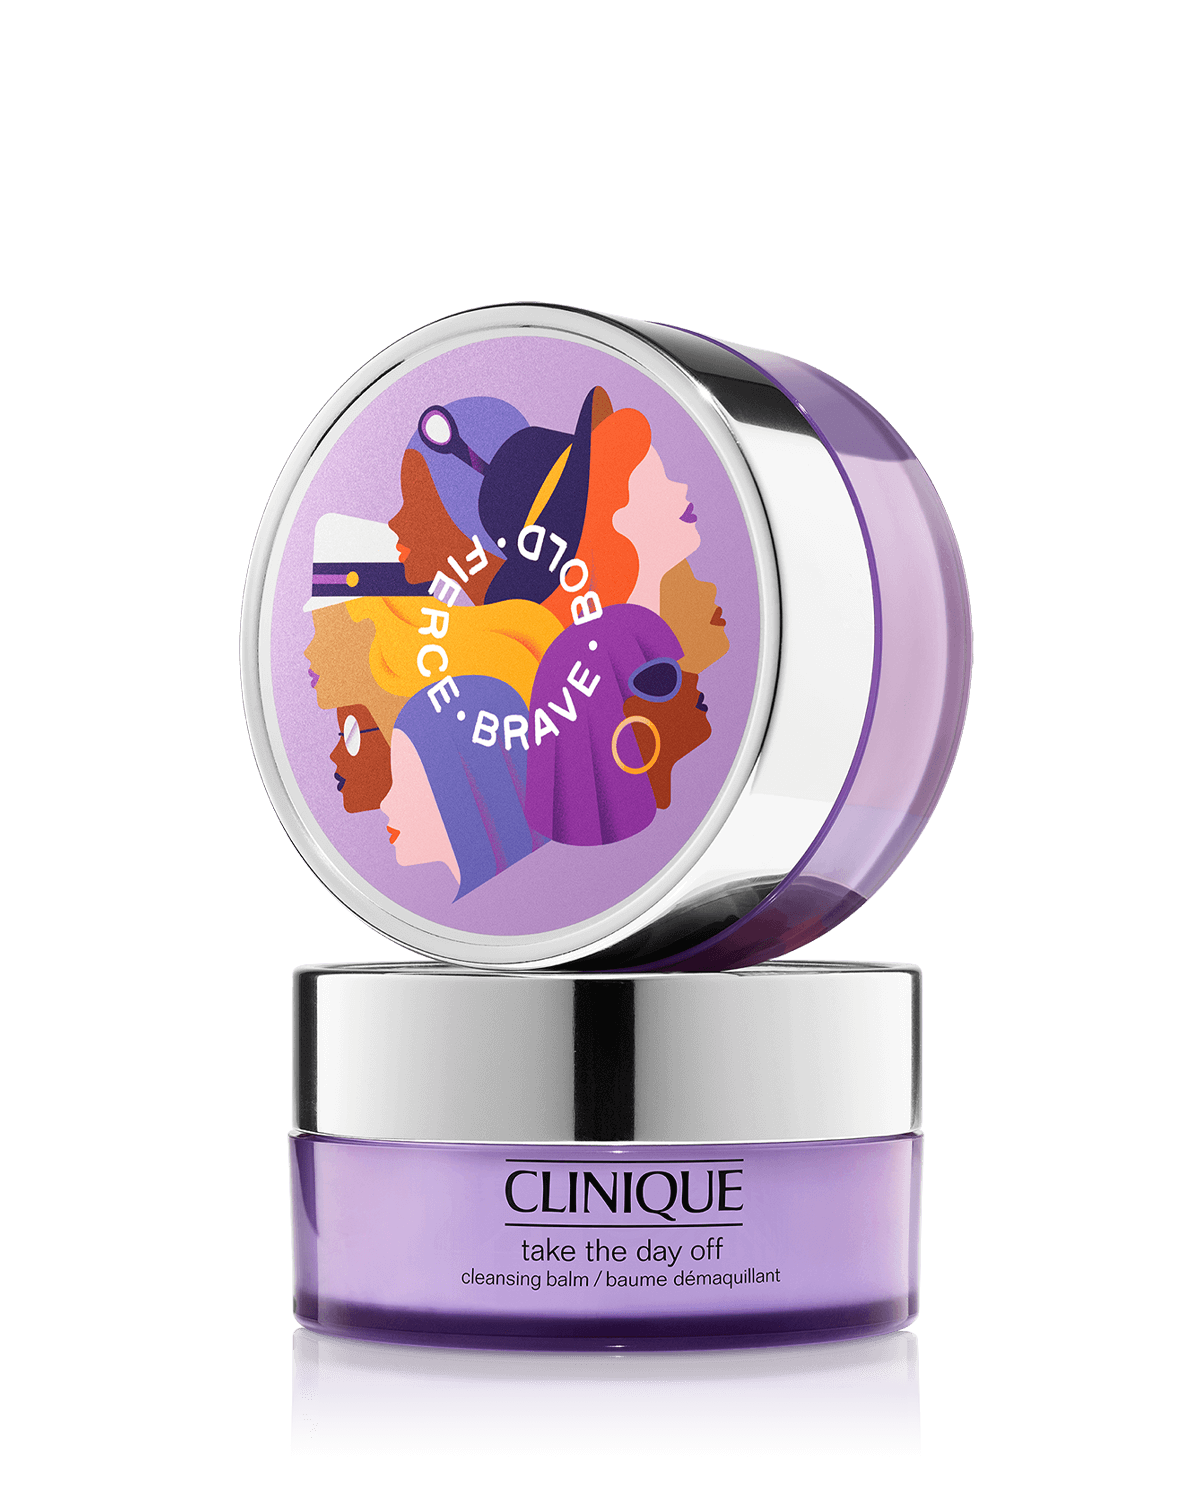 The Take Day | Edition Cleansing Balm Off™ Clinique Limited